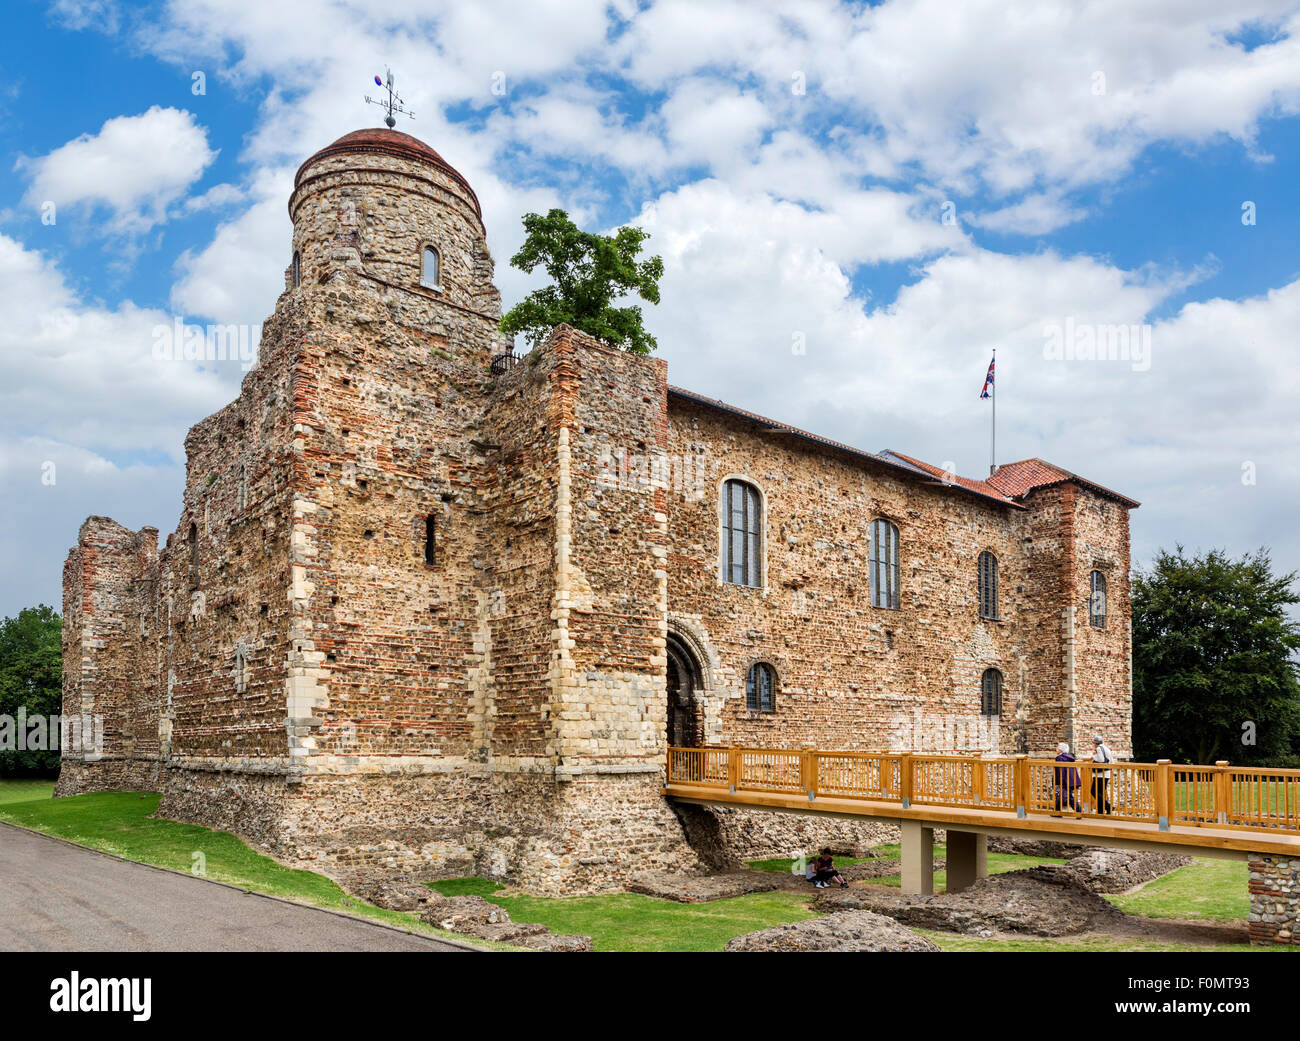 The front of Colchester Castle, Colchester, Essex, England, UK Stock Photo